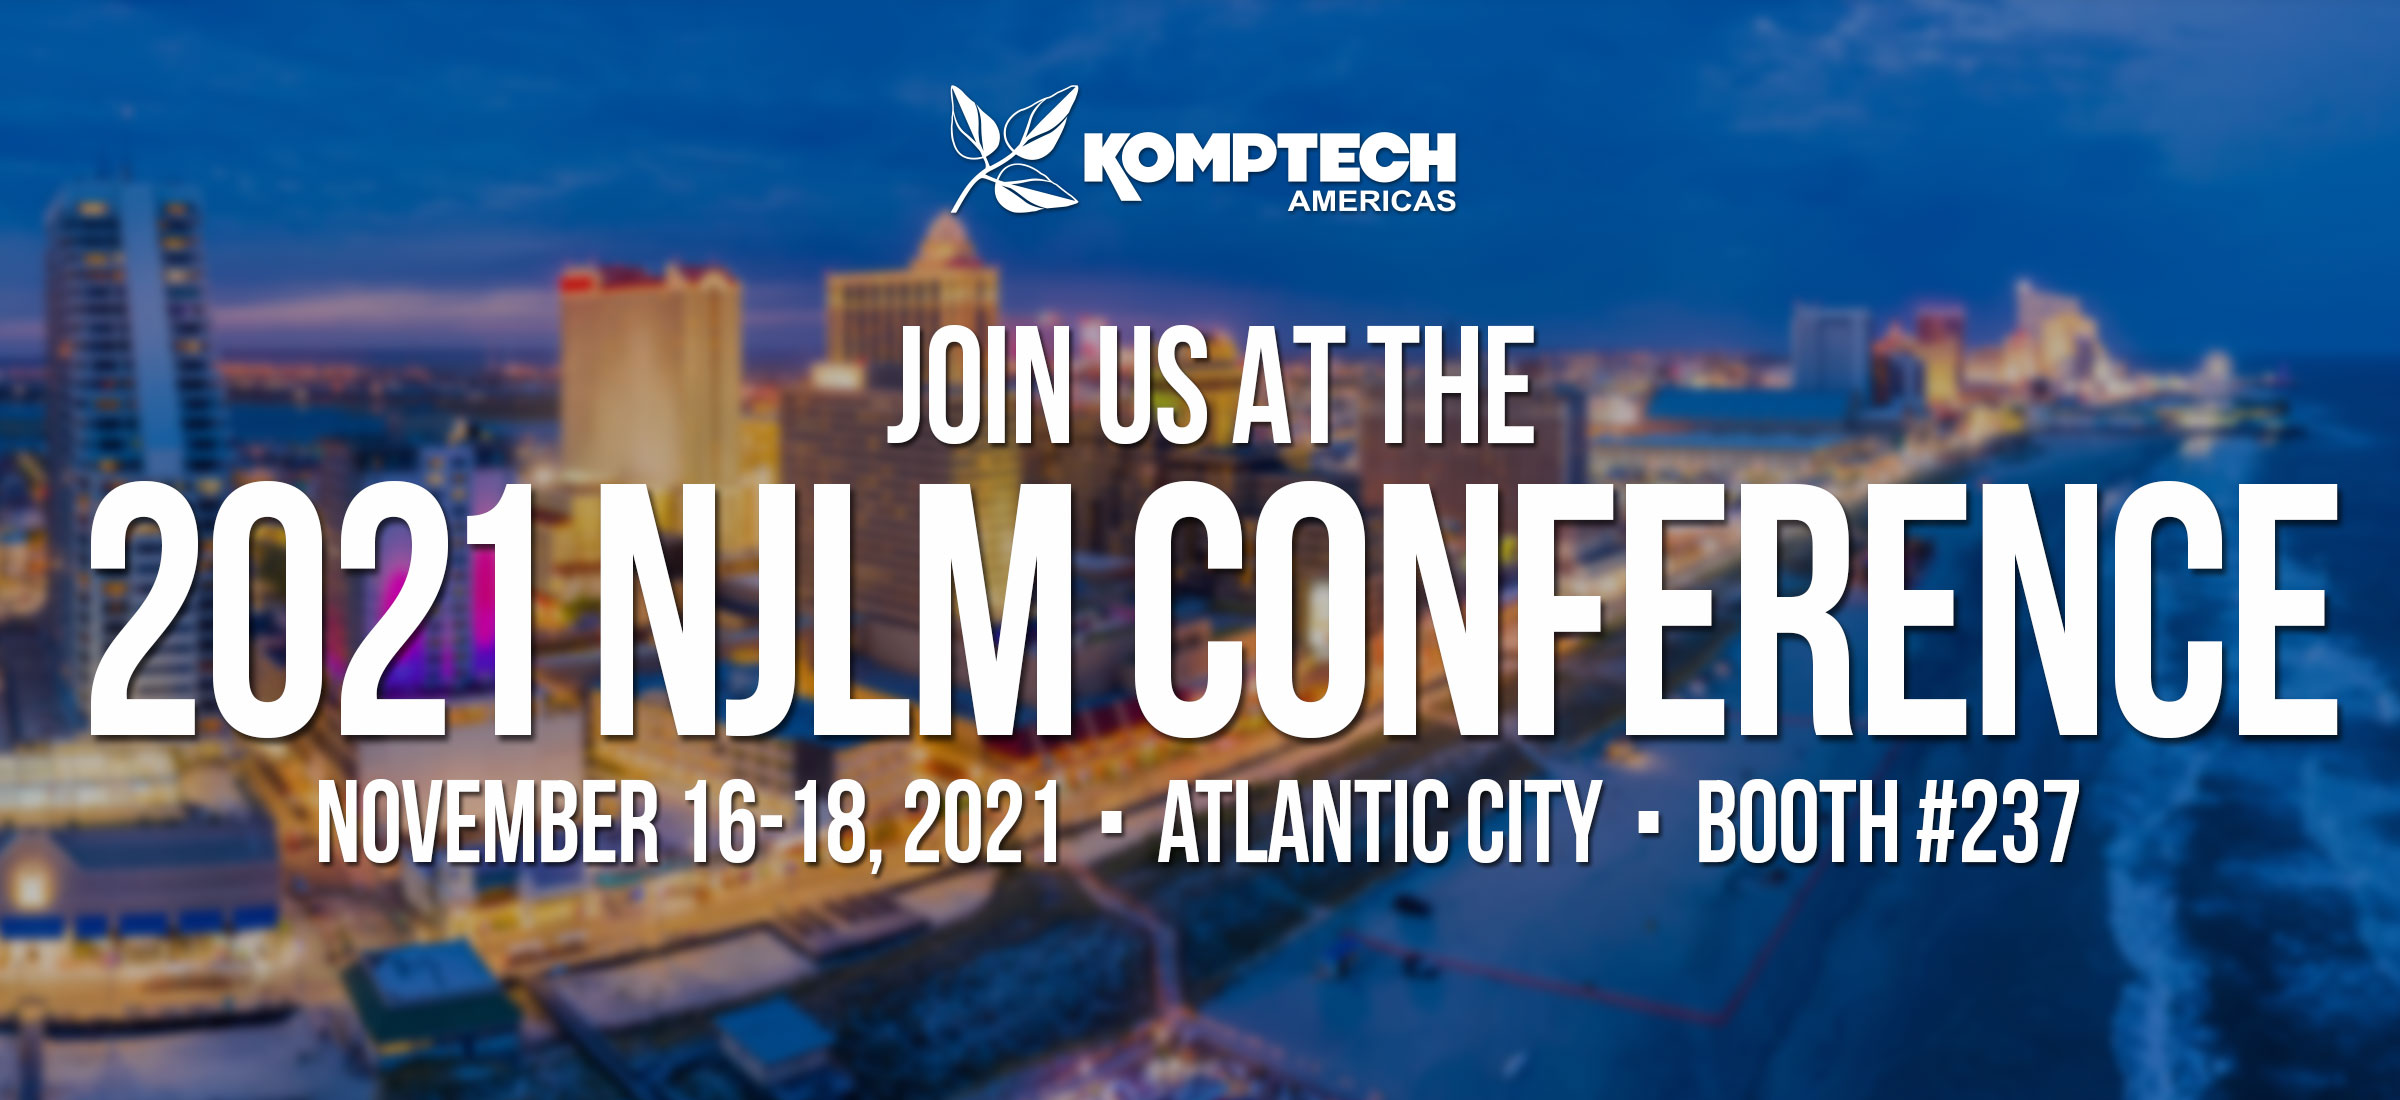 Join us at the 2021 NJLM Confernce, November 16-18, 2021, Atlantic City, Booth #237